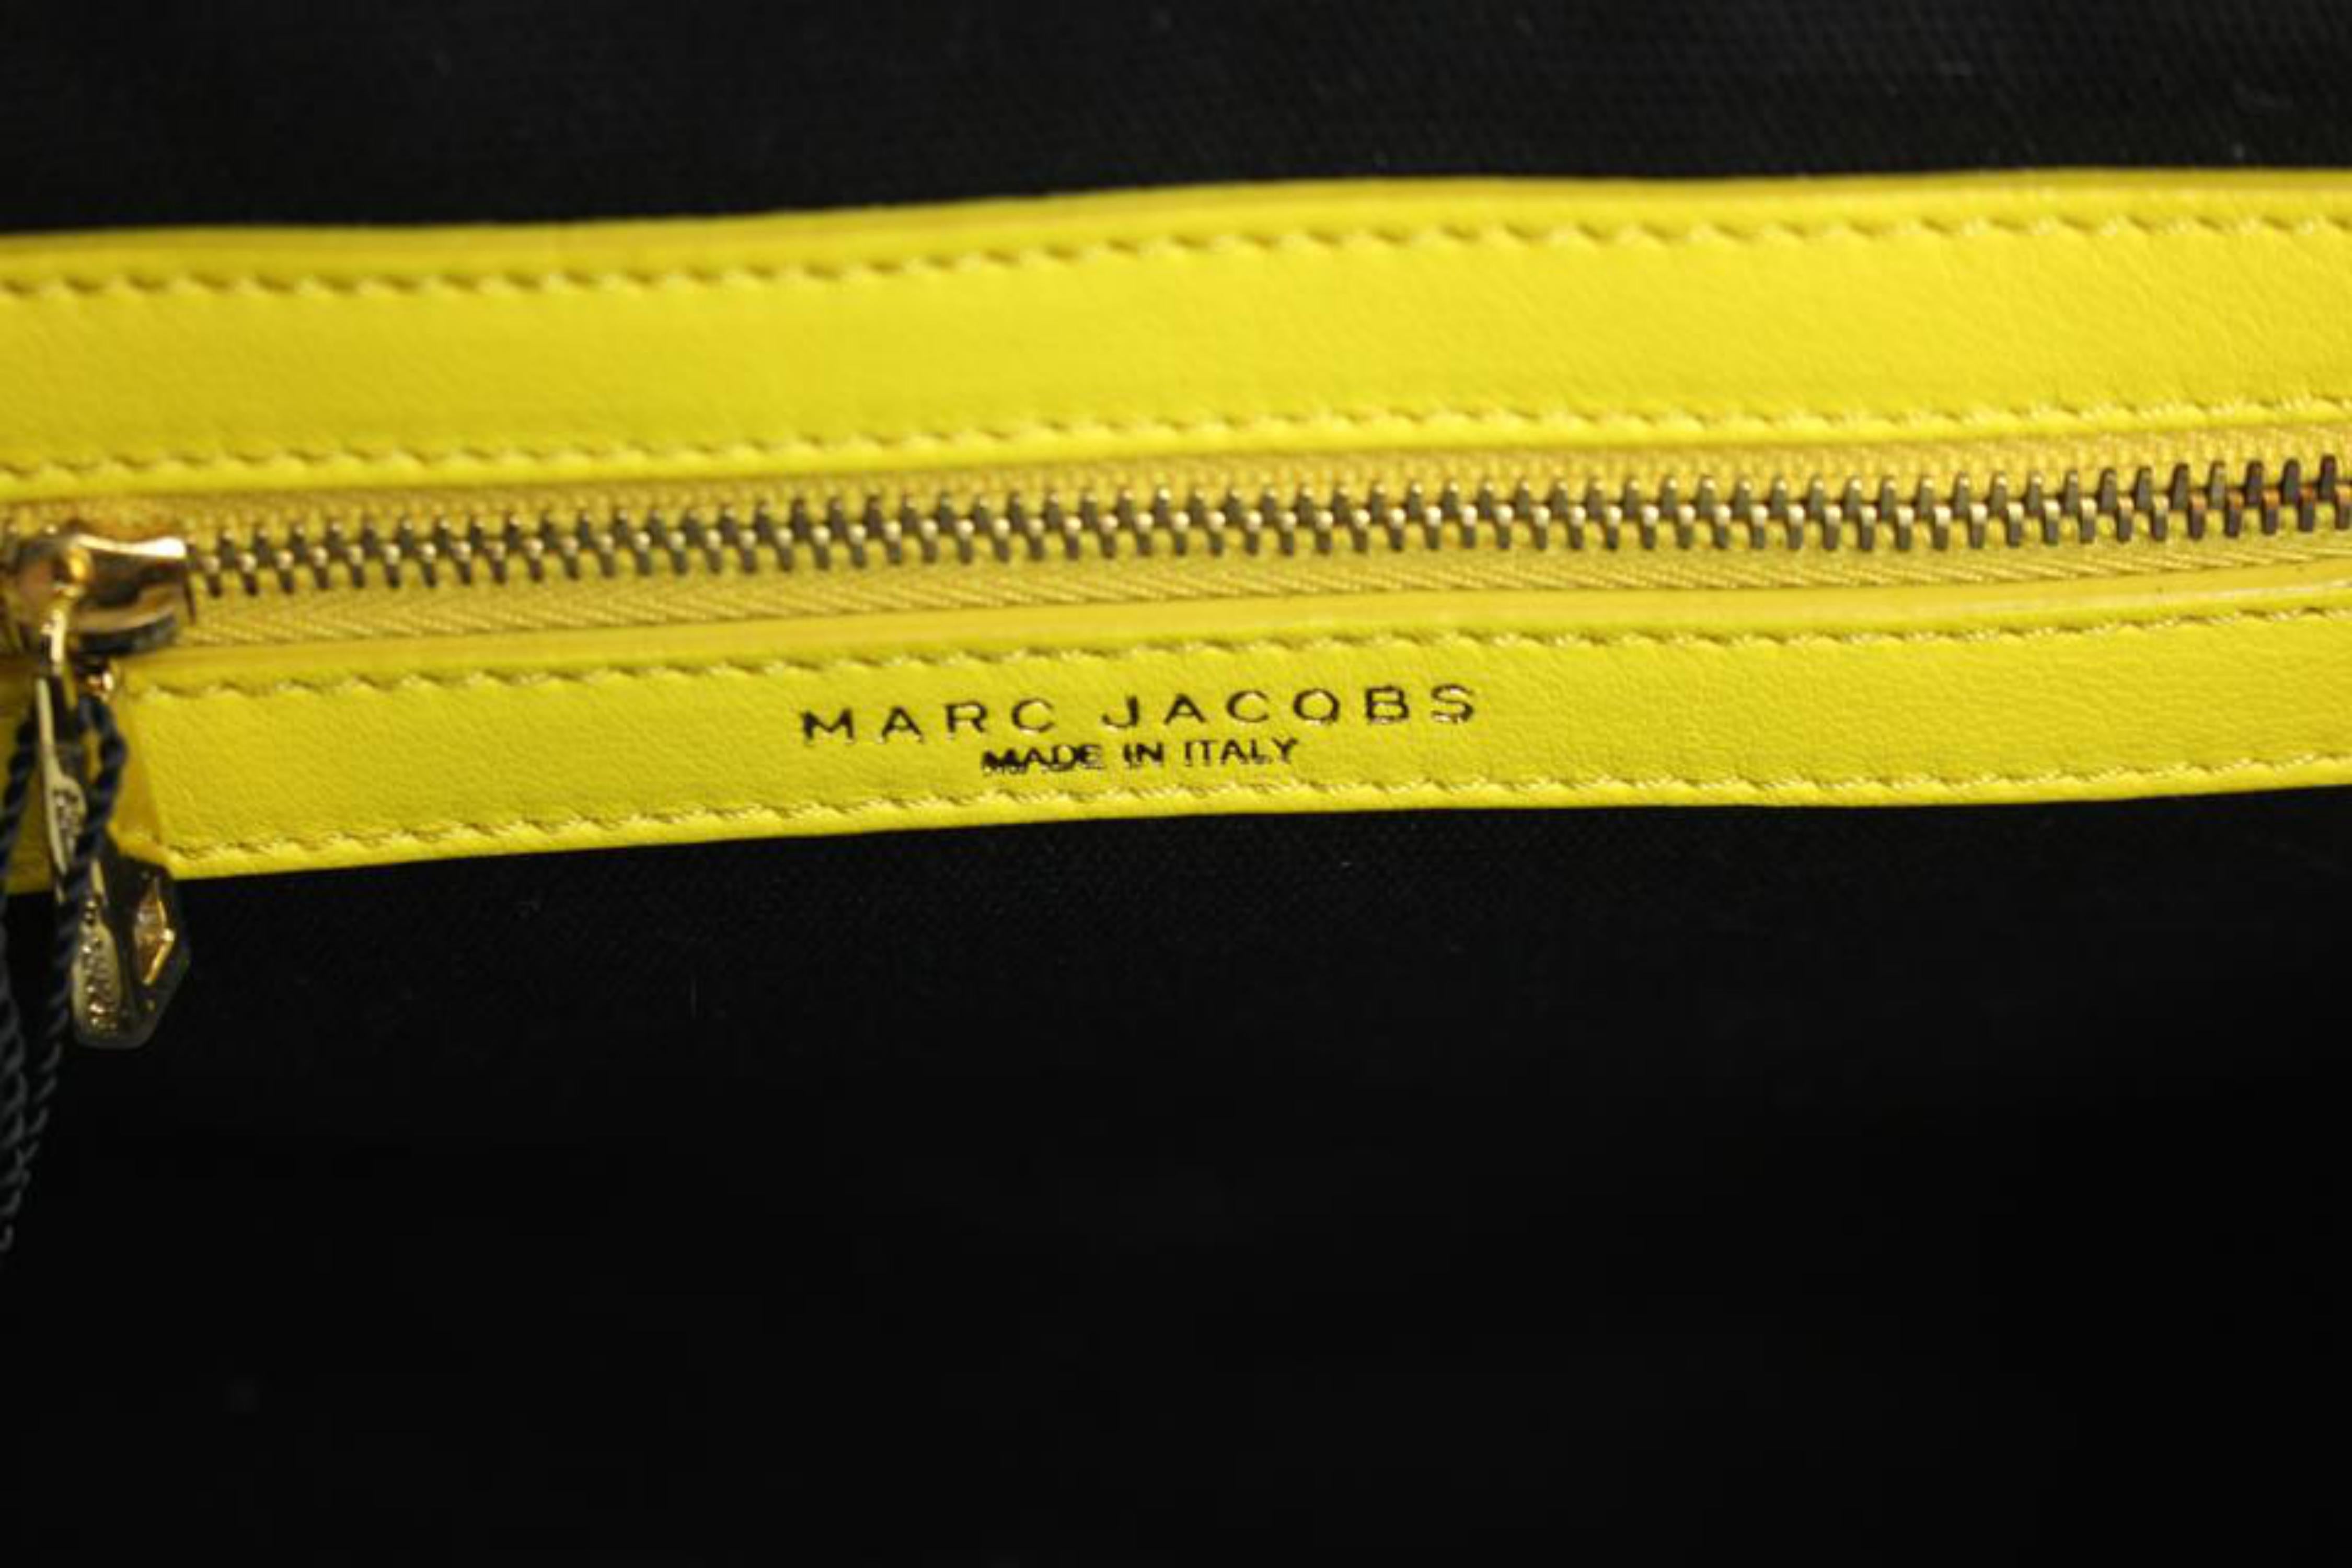 Marc Jacobs Quilted Stam 140mja1025 Yellow Shoulder Bag For Sale 1